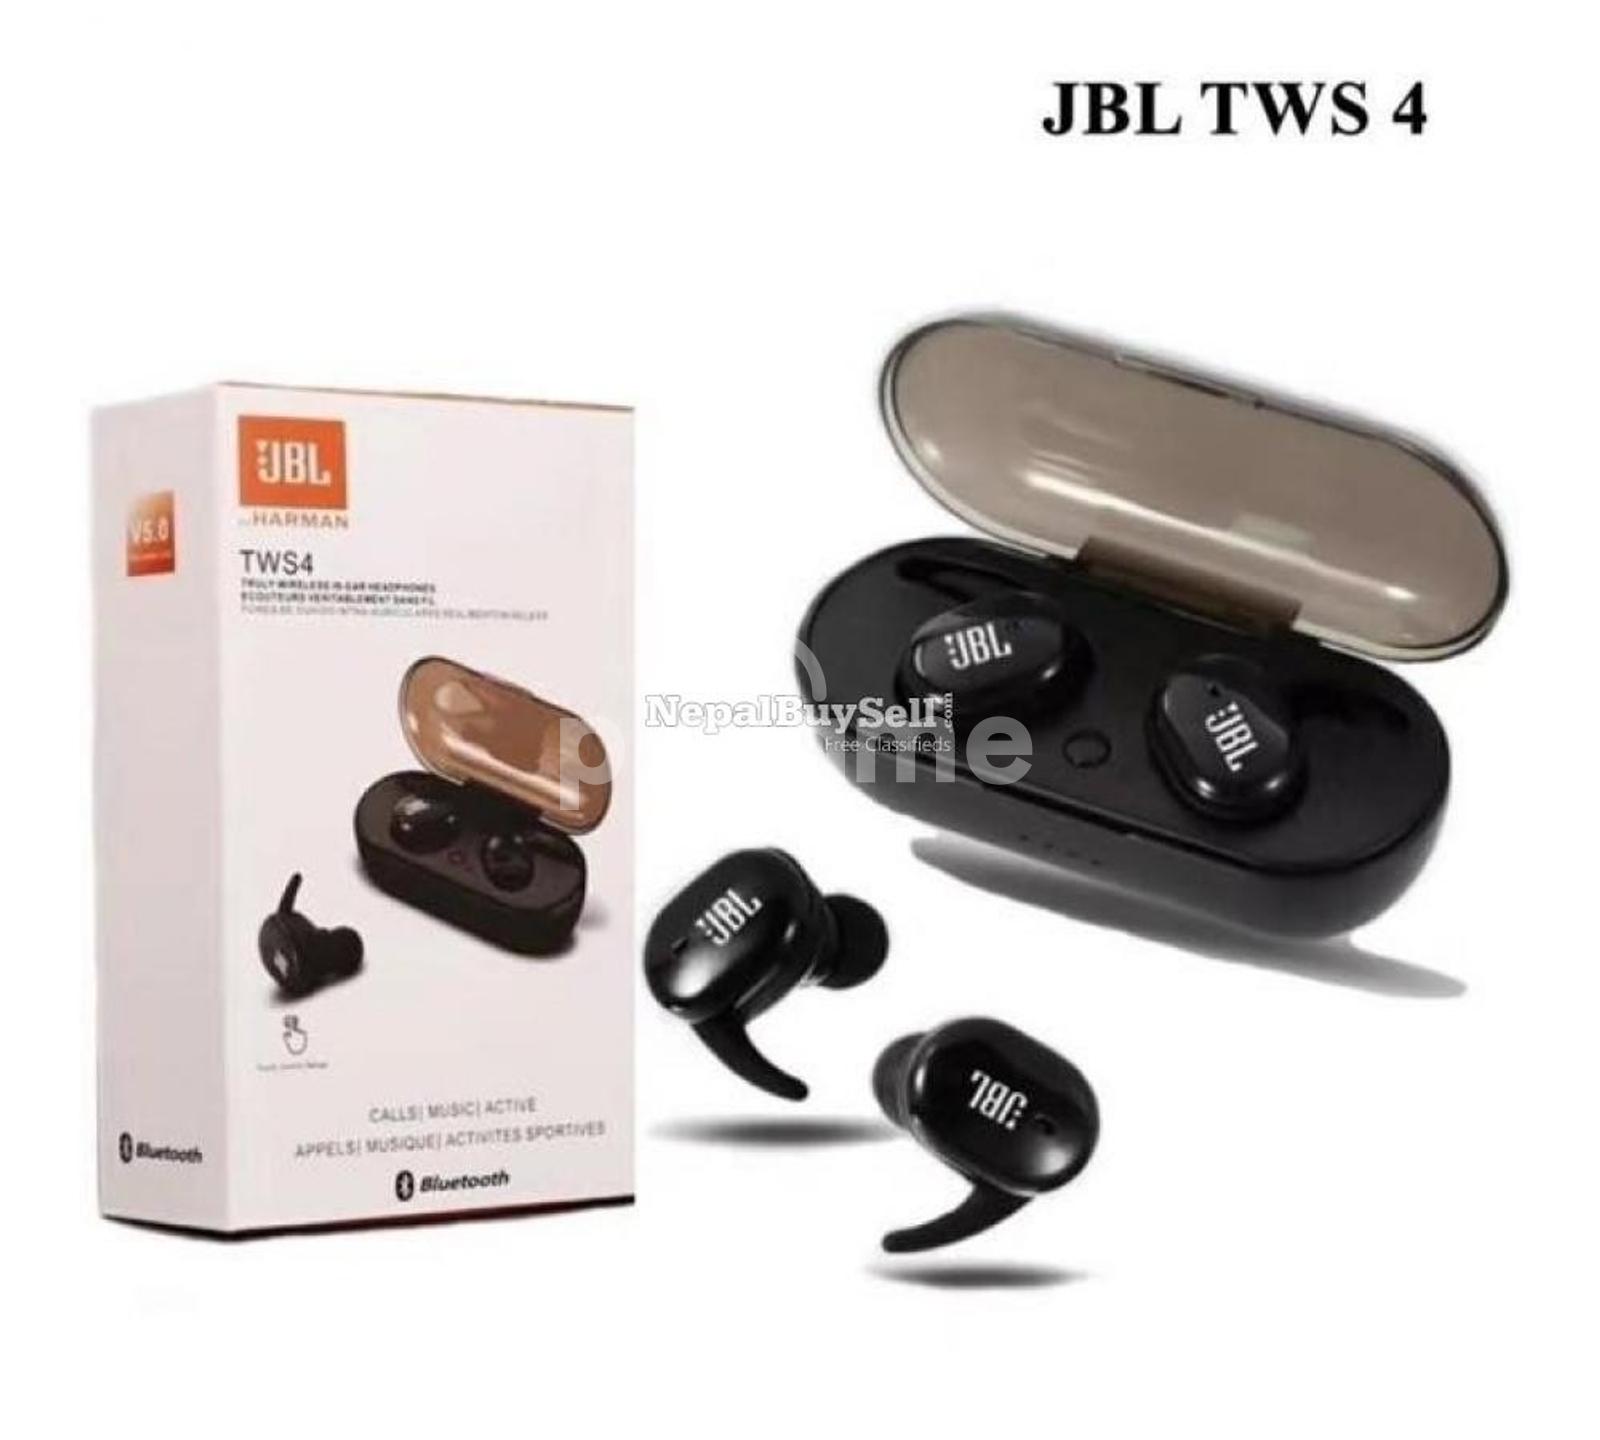 At bygge Sociologi Recollection Jbl Tws 4 Earbuds in Nairobi CBD, Luthuli Avenue | PigiaMe